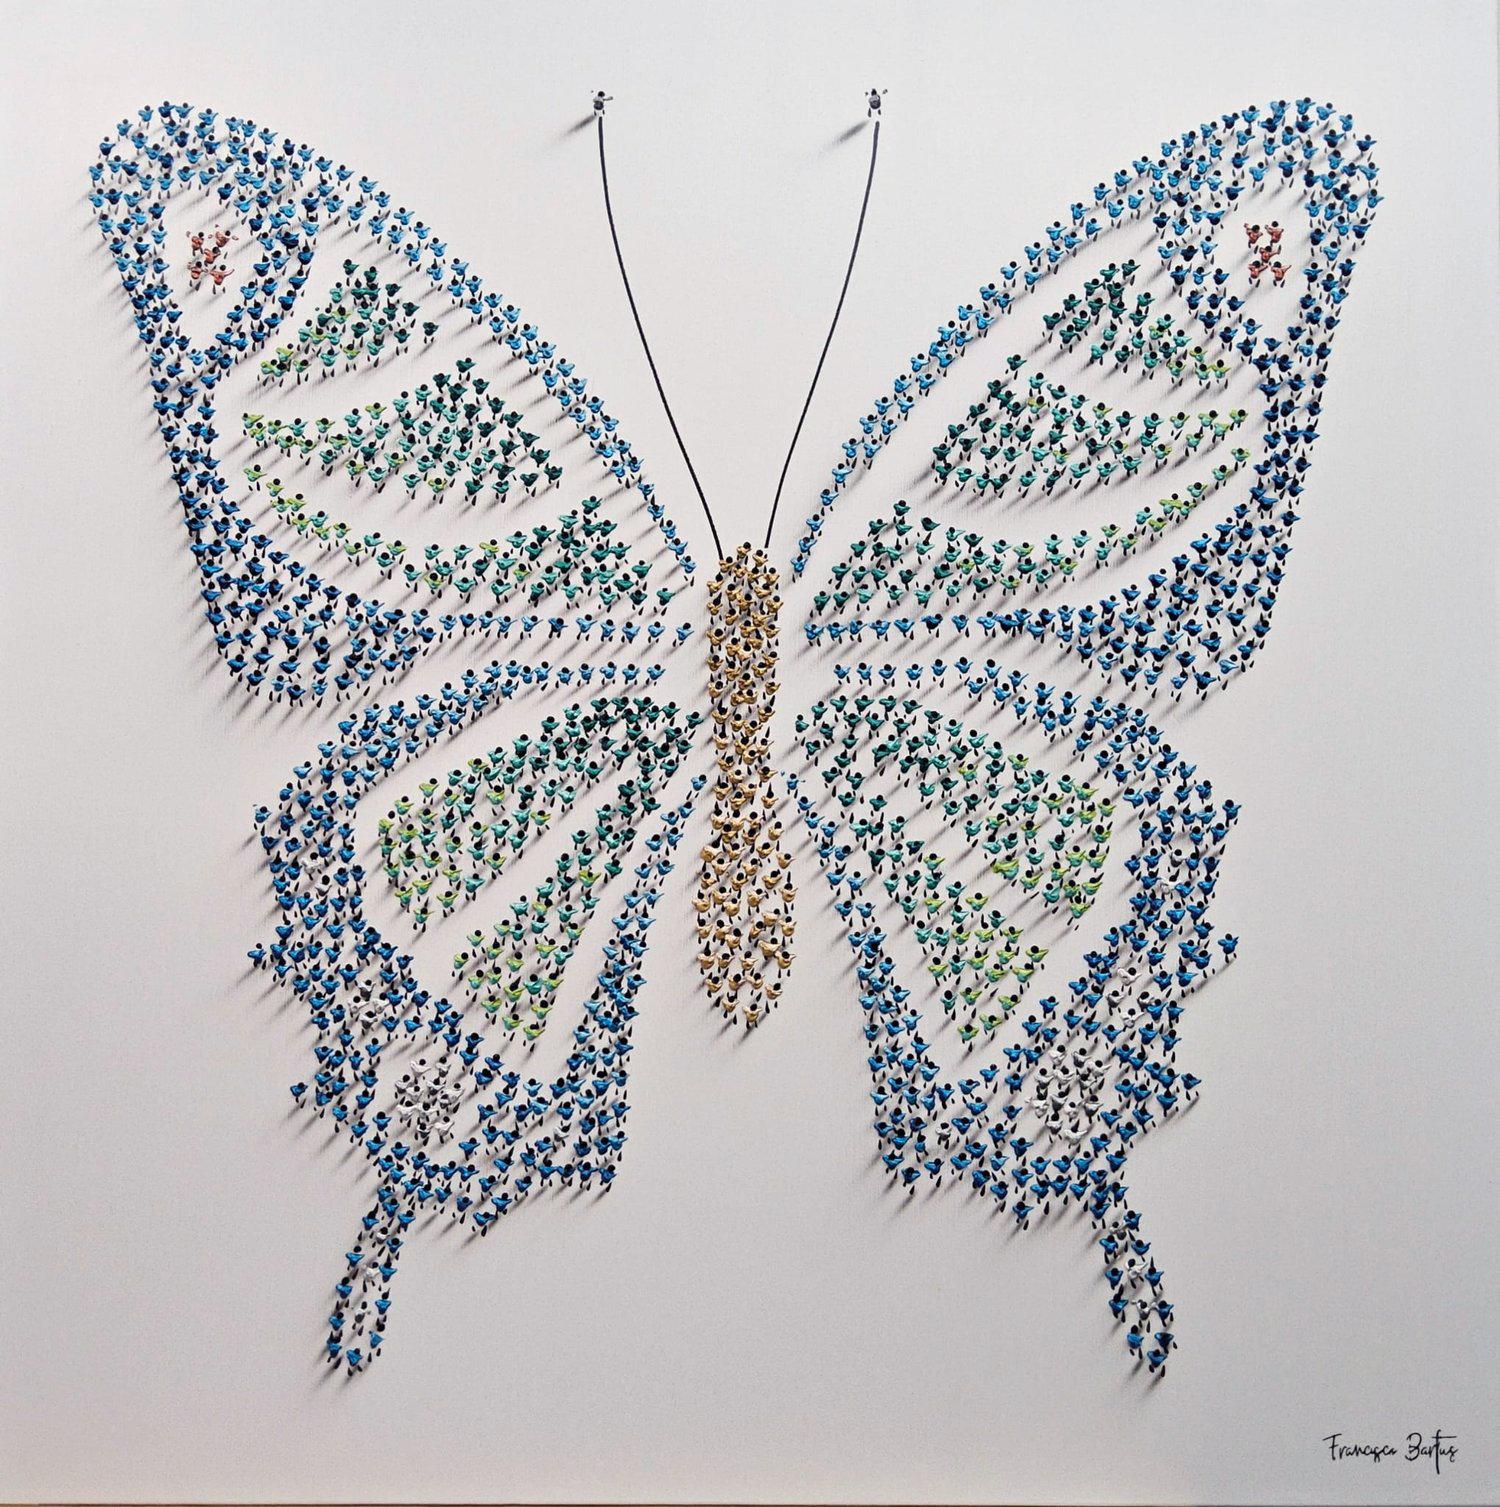 Francisco Bartus, "Emerging", 47x47 Textured Butterfly Mixed Media Painting 